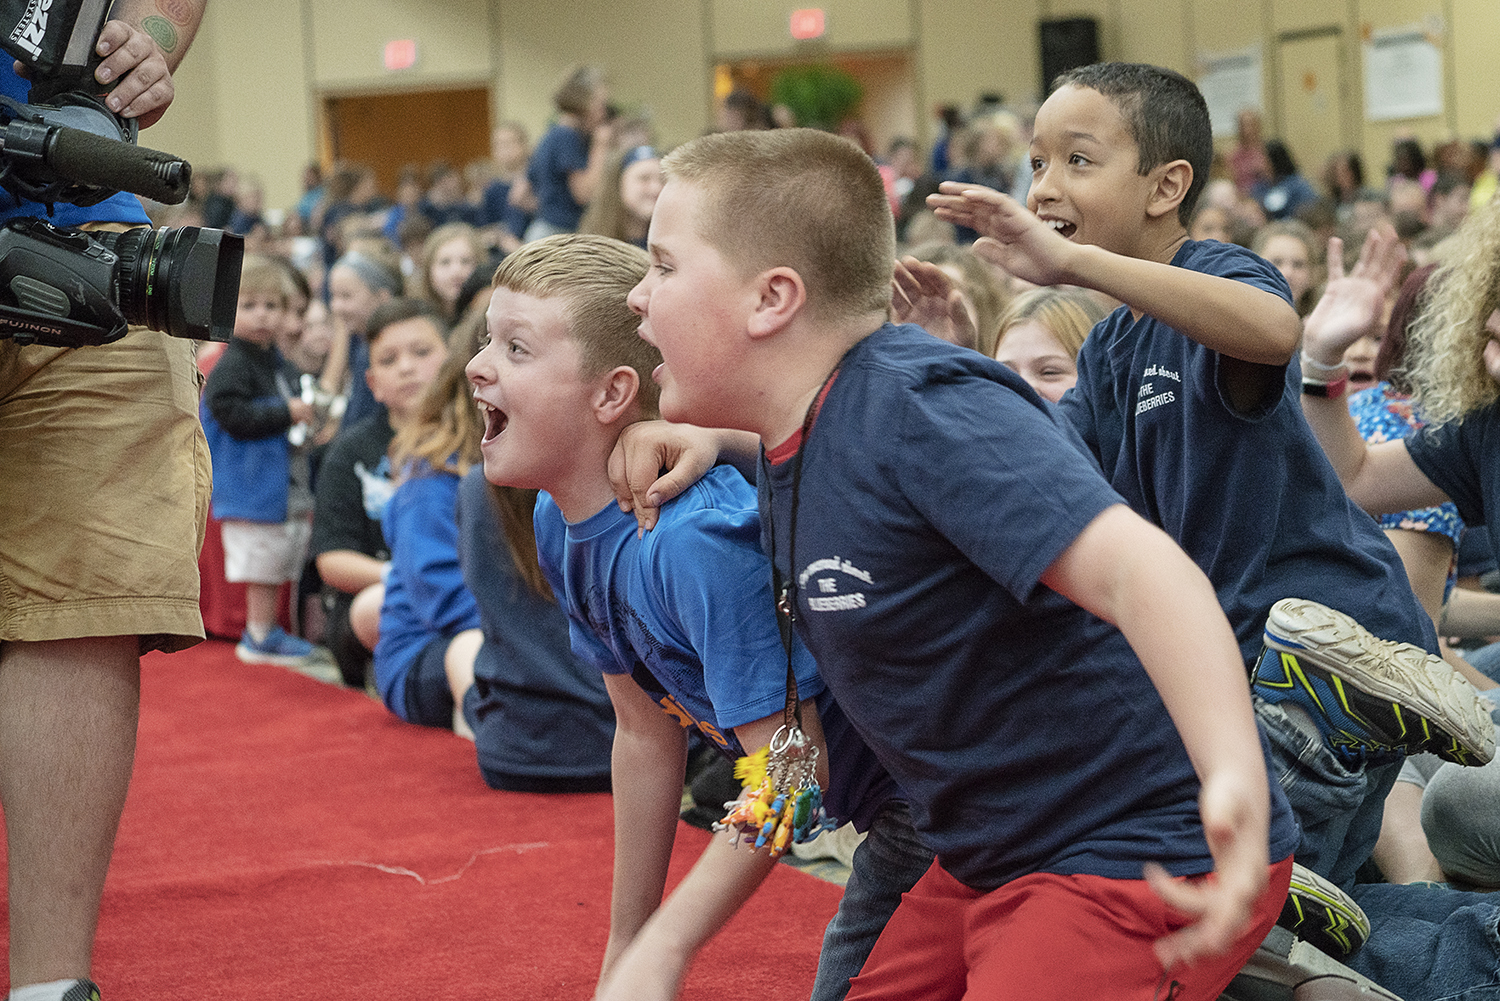 Flint, MI - Friday, May 4, 2018: Enthusiastic Blueberry Ambassadors cheer and jeer at the camera before the show begins at the 5th Annual Blueberry Ambassador Party at the Riverfront Banquet Center downtown.